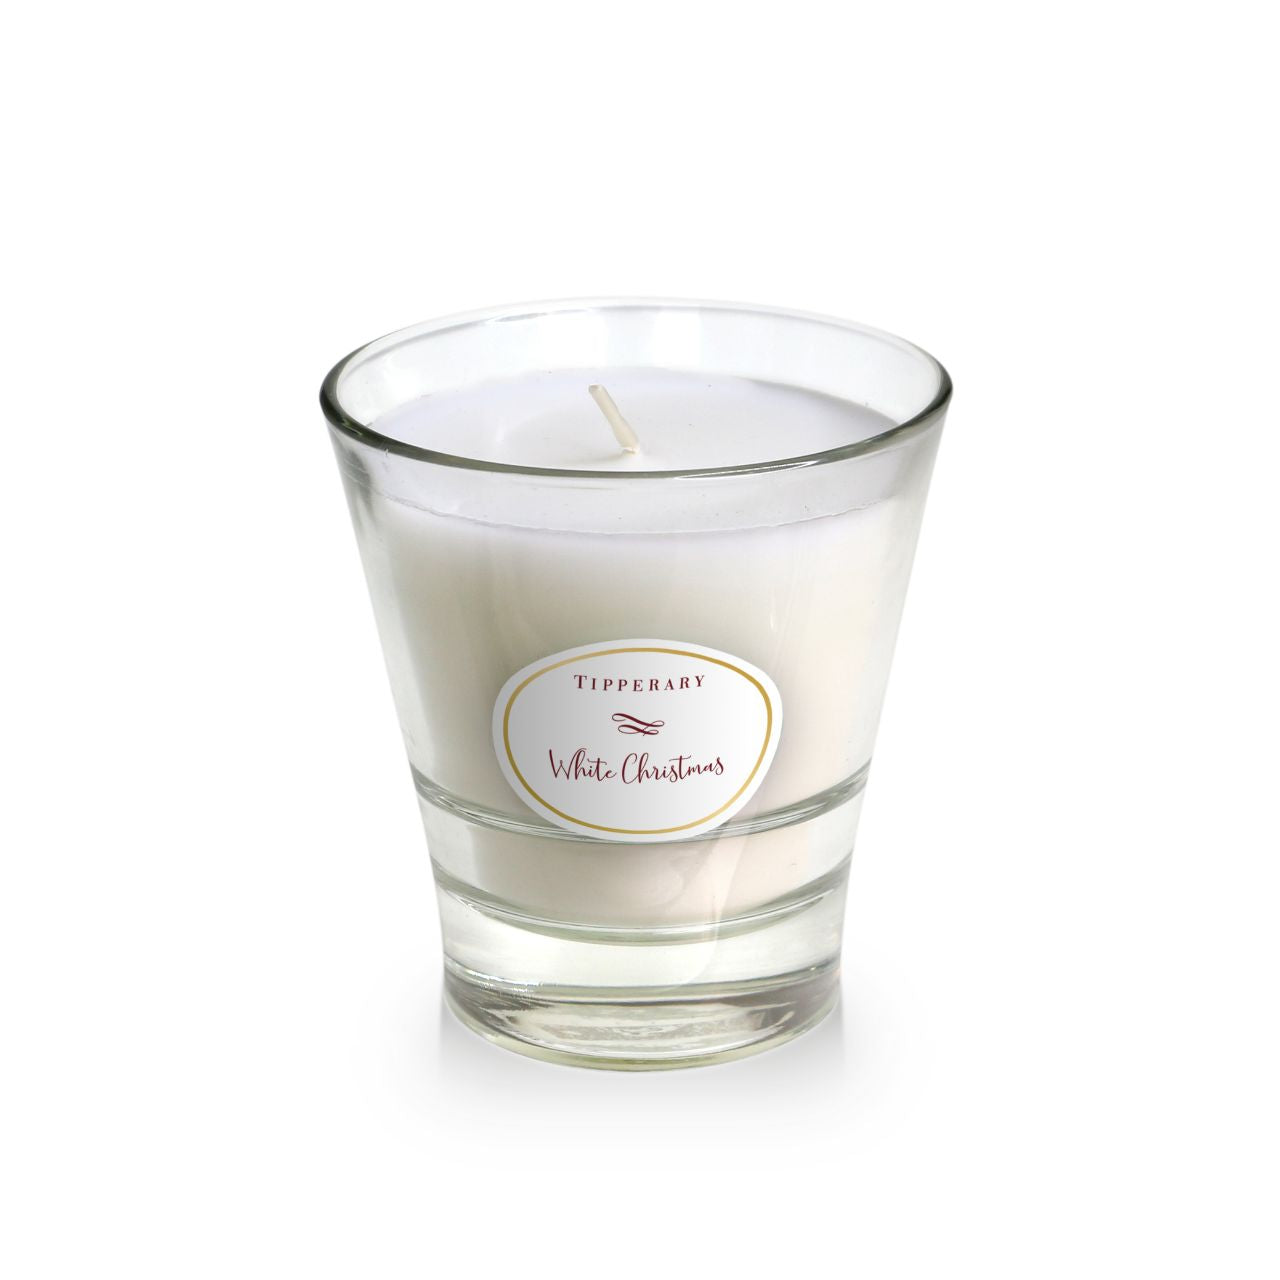 White Christmas Poinsettia Tumbler Candle by Tipperary  A classic Christmas fragrance with warm notes of orange spice amber and musk. Bringing festive cheer to your home.  "Inspired by the warm, spicy aromas of the festive season Tipperary has produced the most beautiful collection of Christmas-inspired scented candles and fragrance diffuser sets all of which are presented in exquisitely designed festive gift boxes.